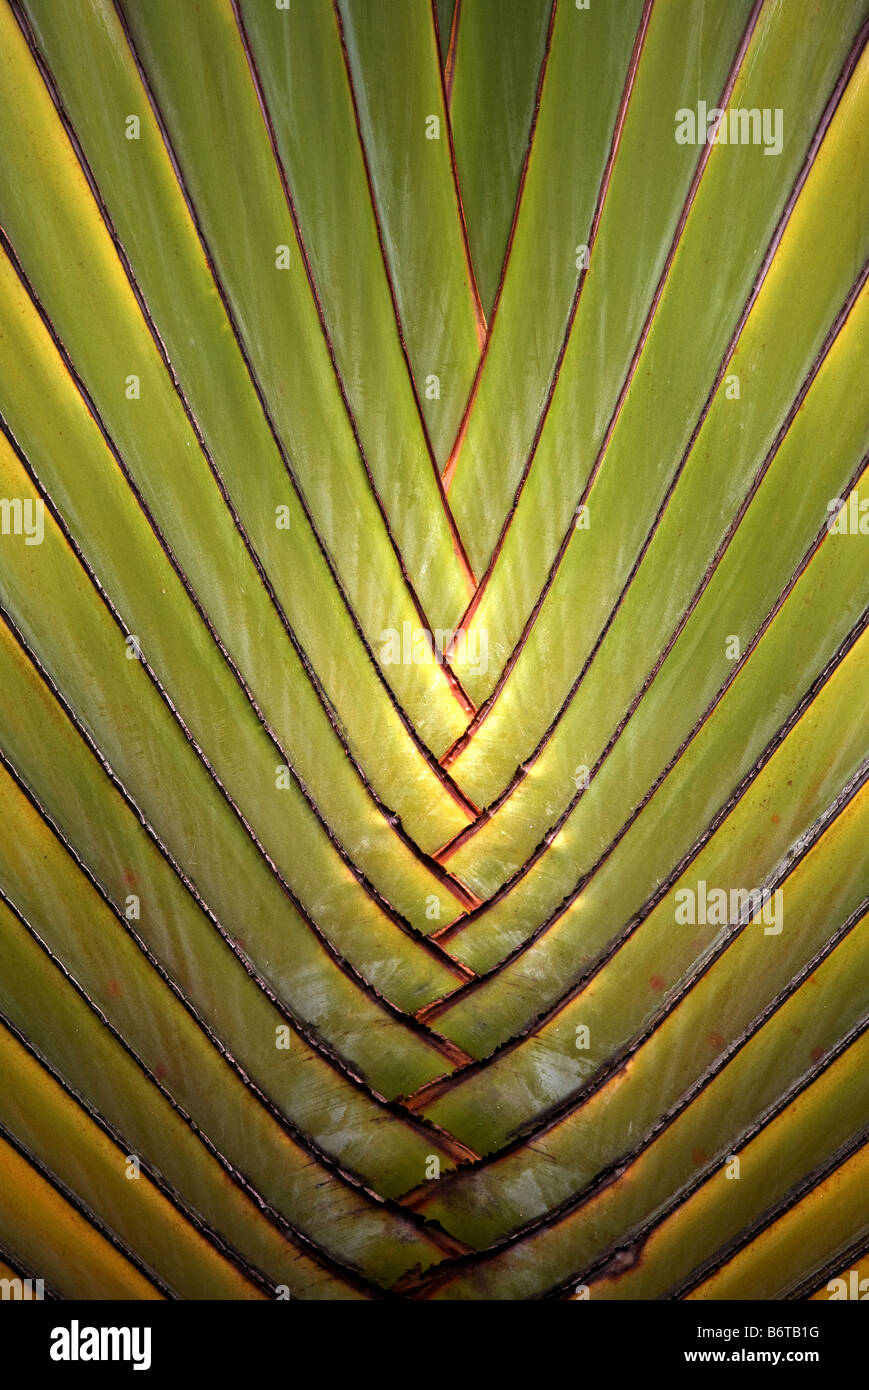 Travellers Palm in close-up, Caribbean Island. Stock Photo